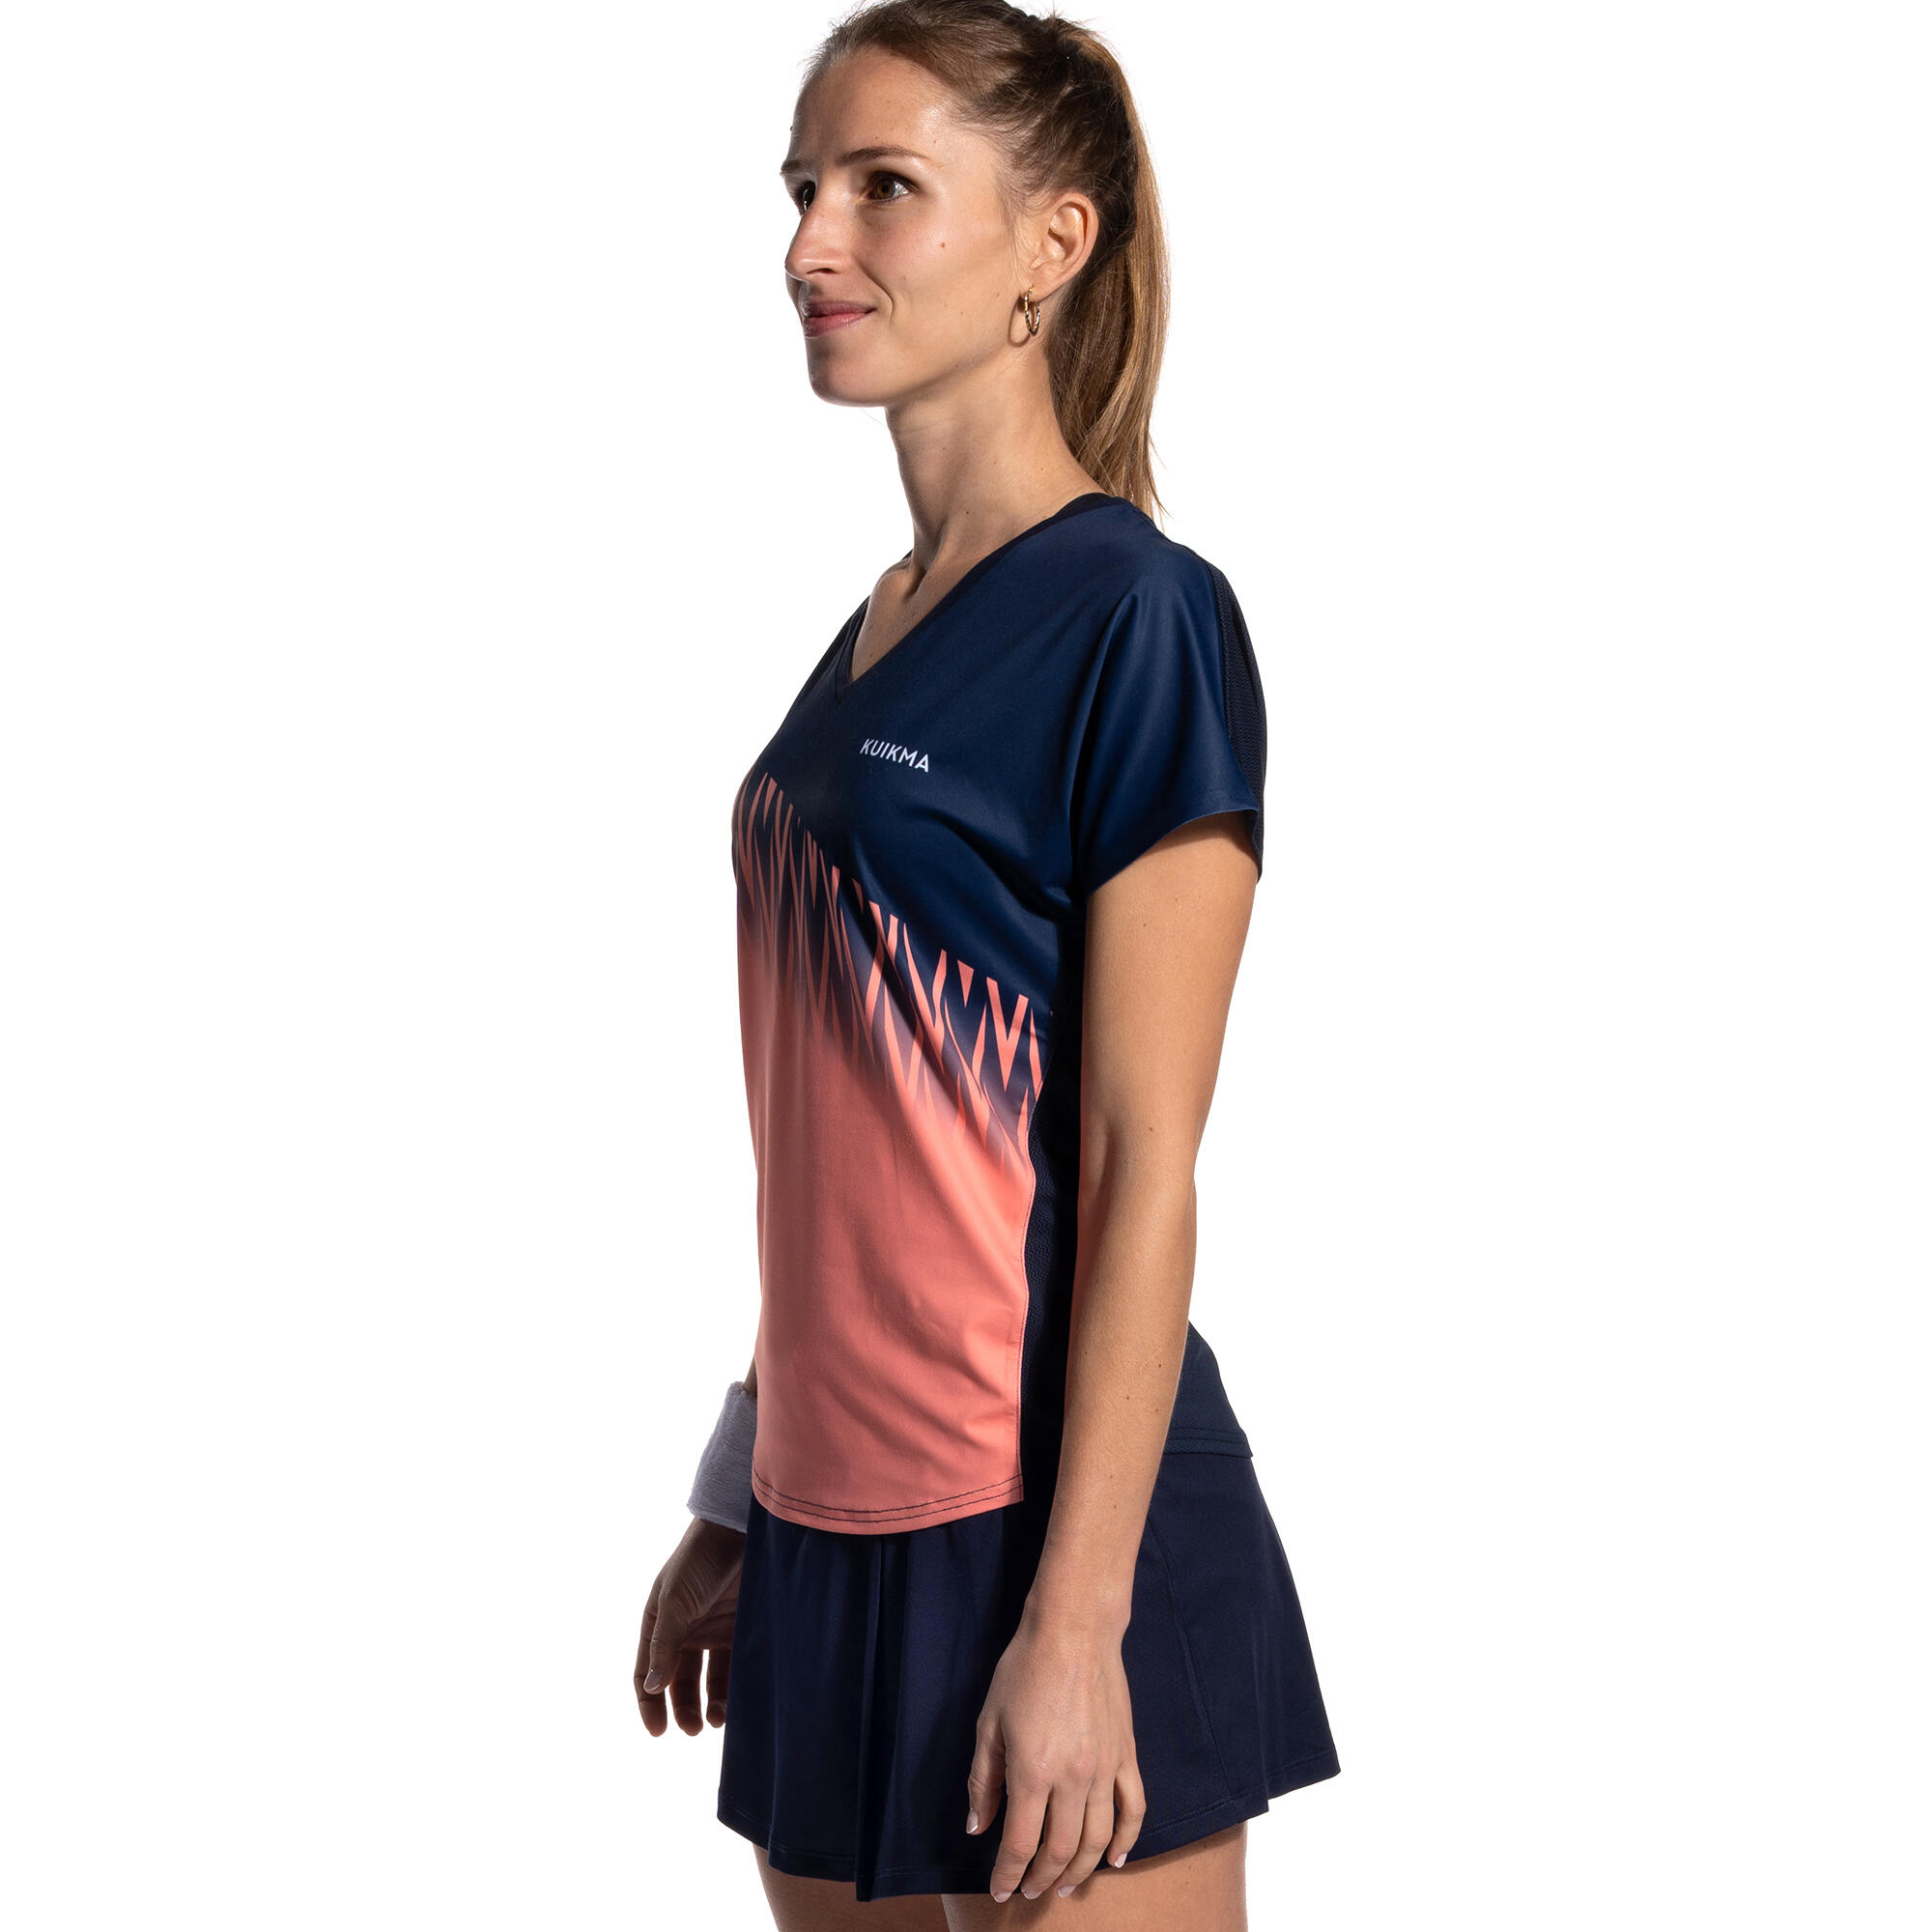 Women's Short-Sleeved Breathable Padel T-Shirt 500 - Blue/Coral 2/8